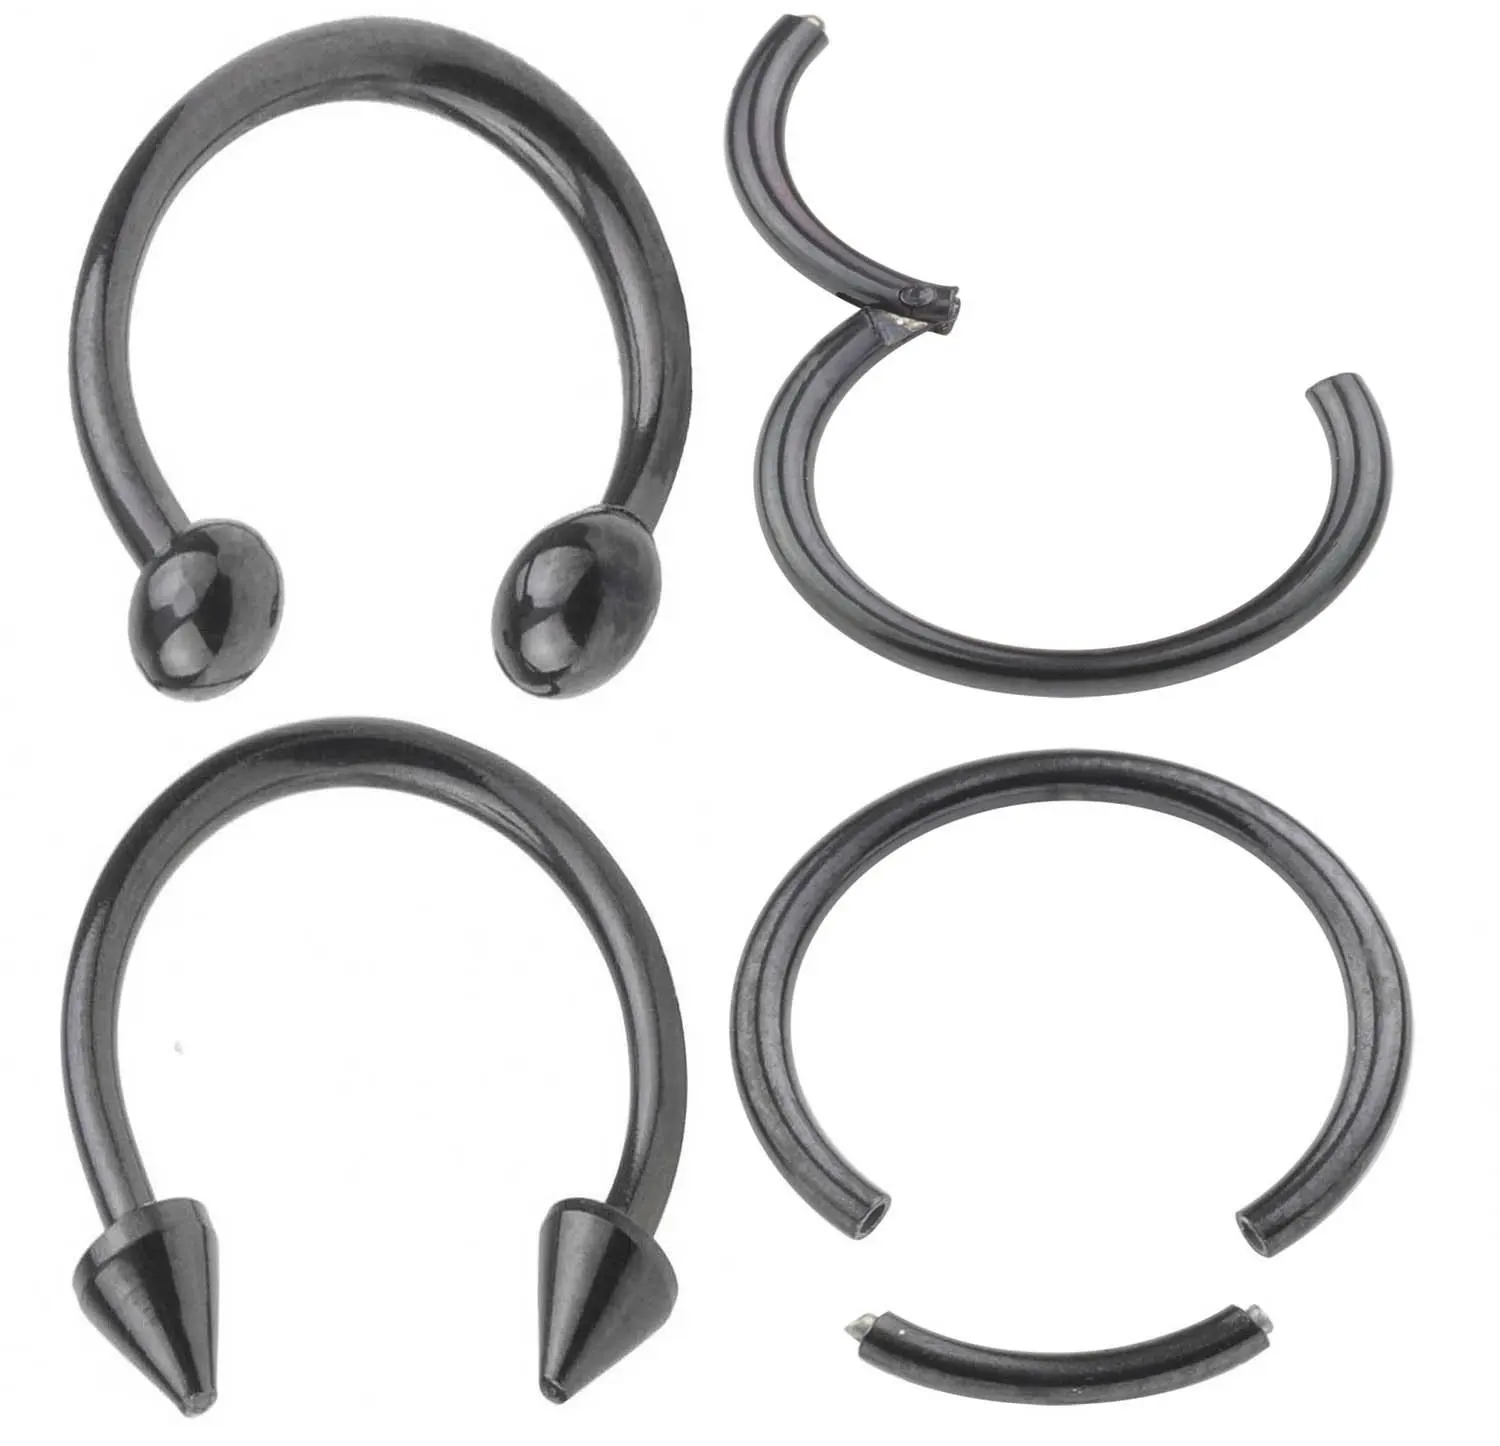 Buy WTs 16G 8mm 316L Stainless Steel Body Jewelry Piercing Nose Ring 316l Stainless Steel Nose Rings